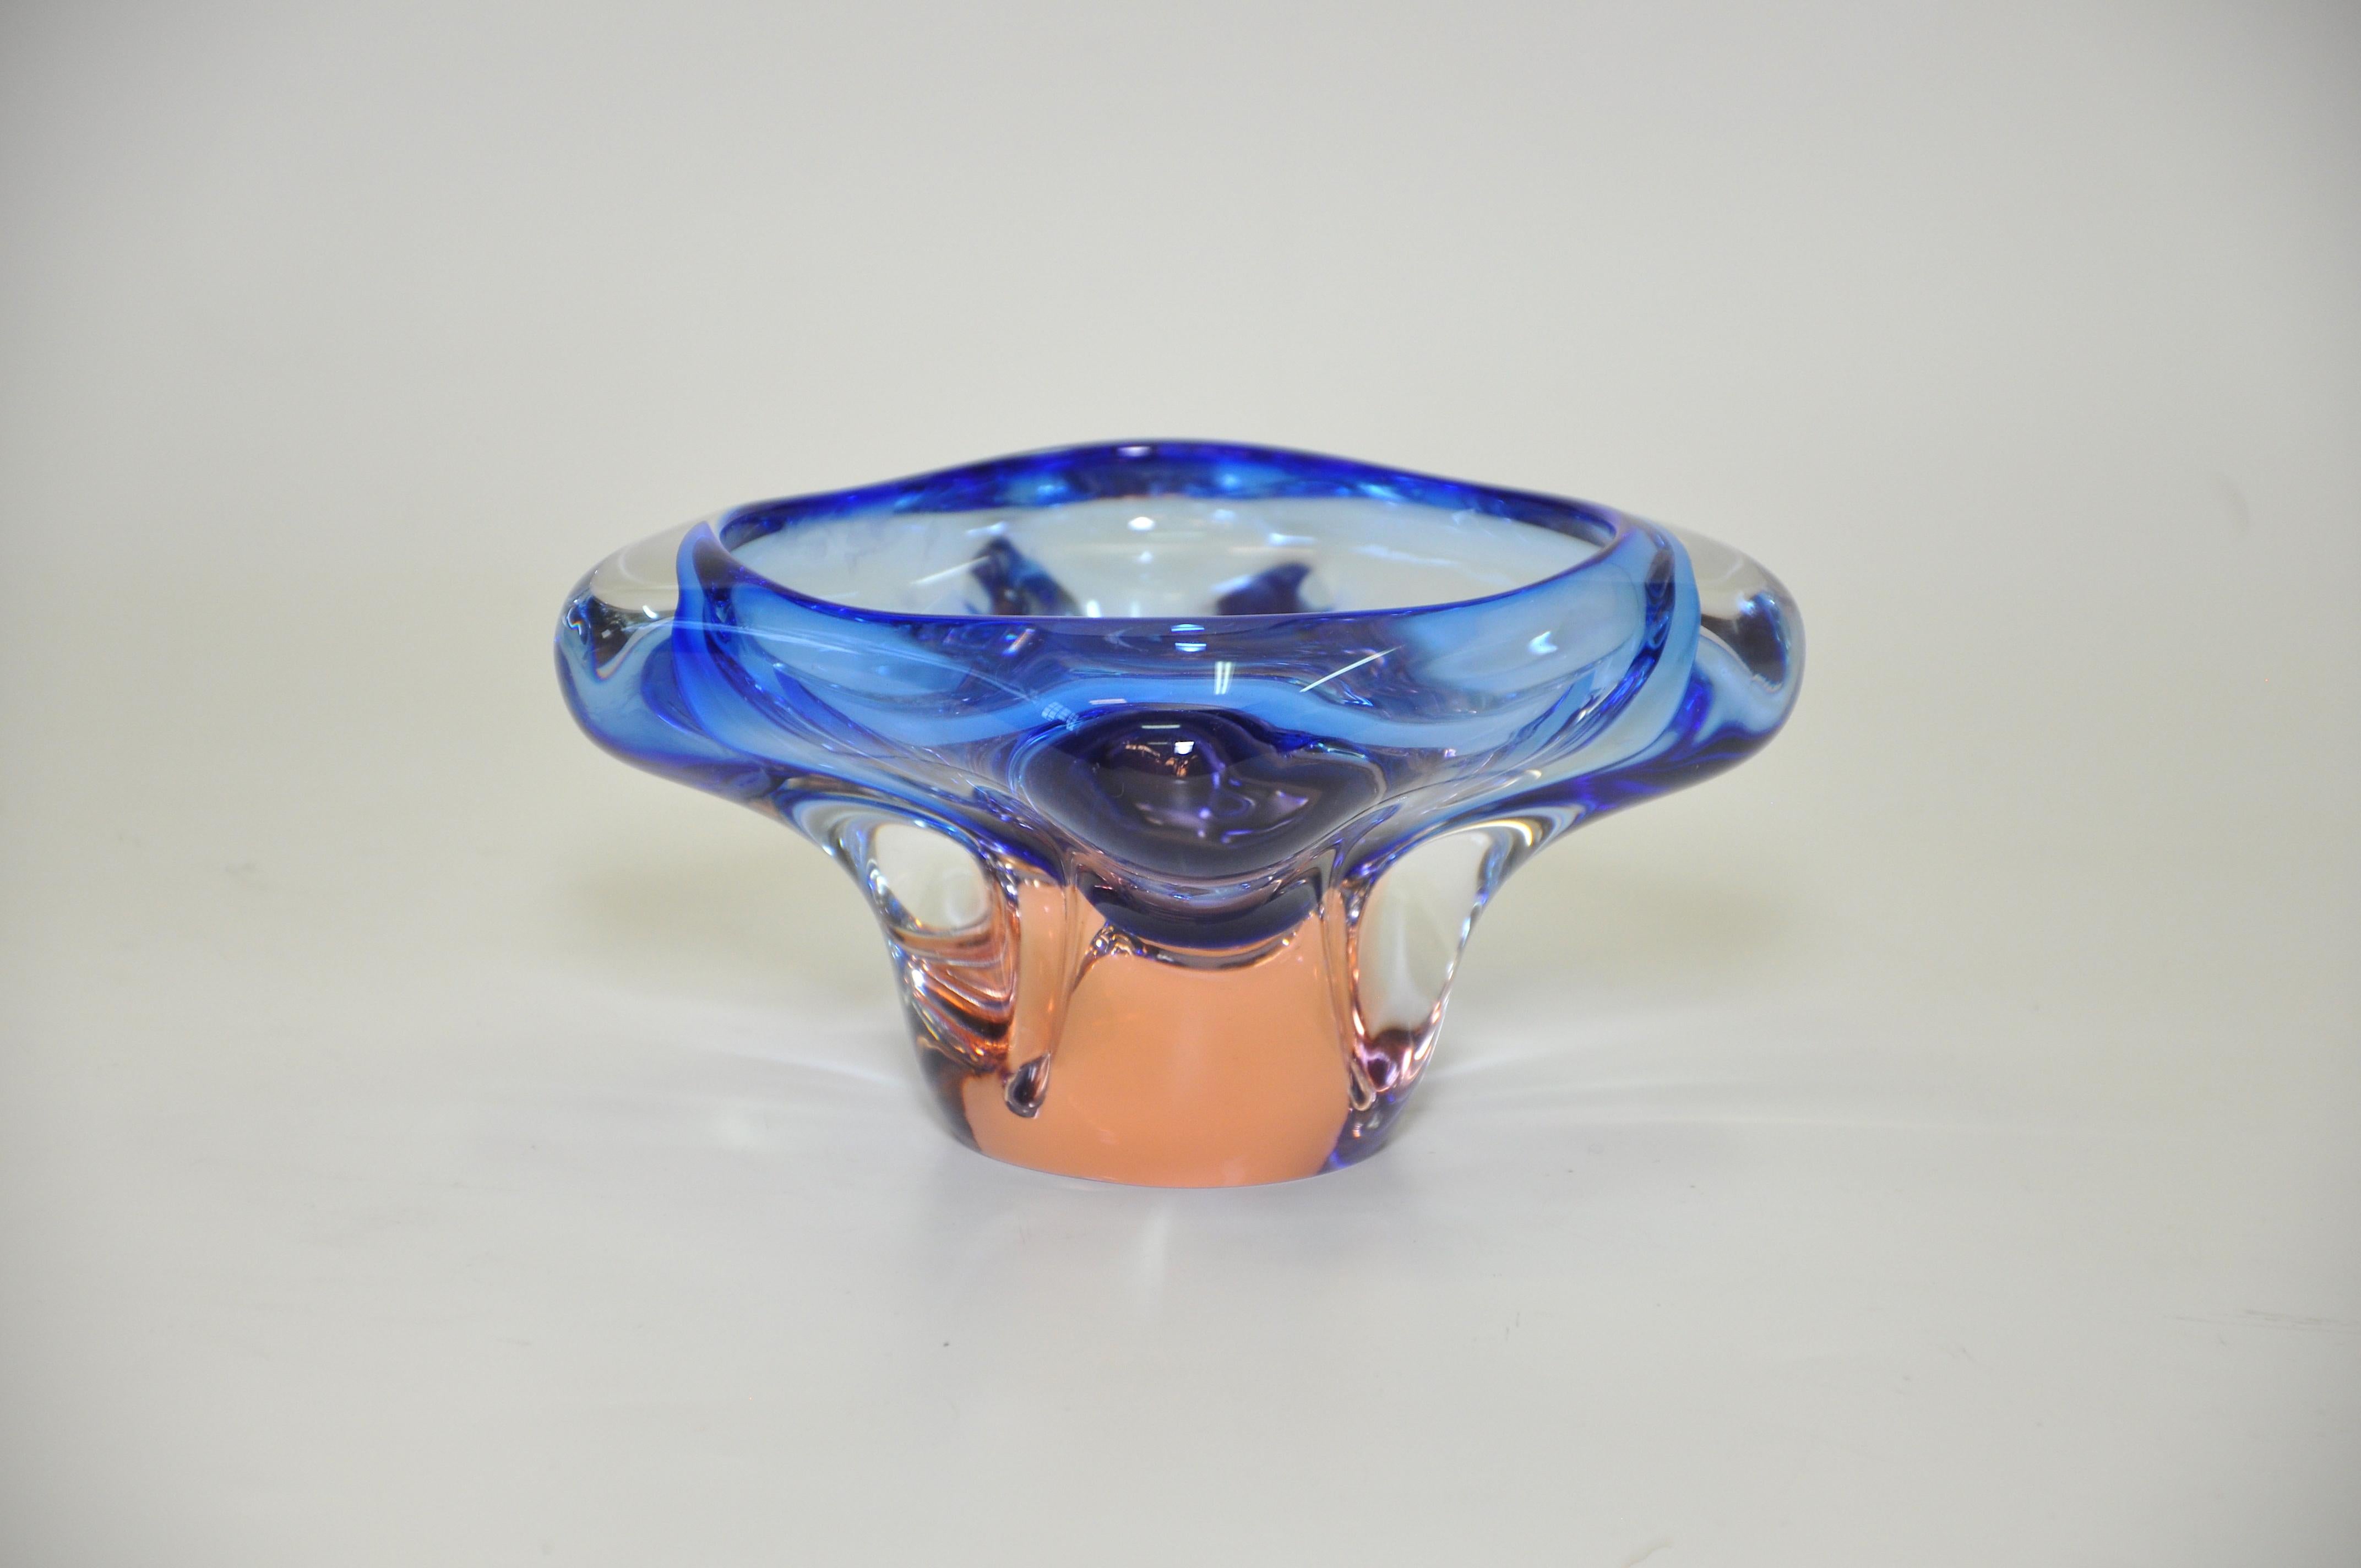 Stunning Vintage Blue Peach Art Glass Bowl Italian Murano In Excellent Condition For Sale In Great Britain, Northern Ireland